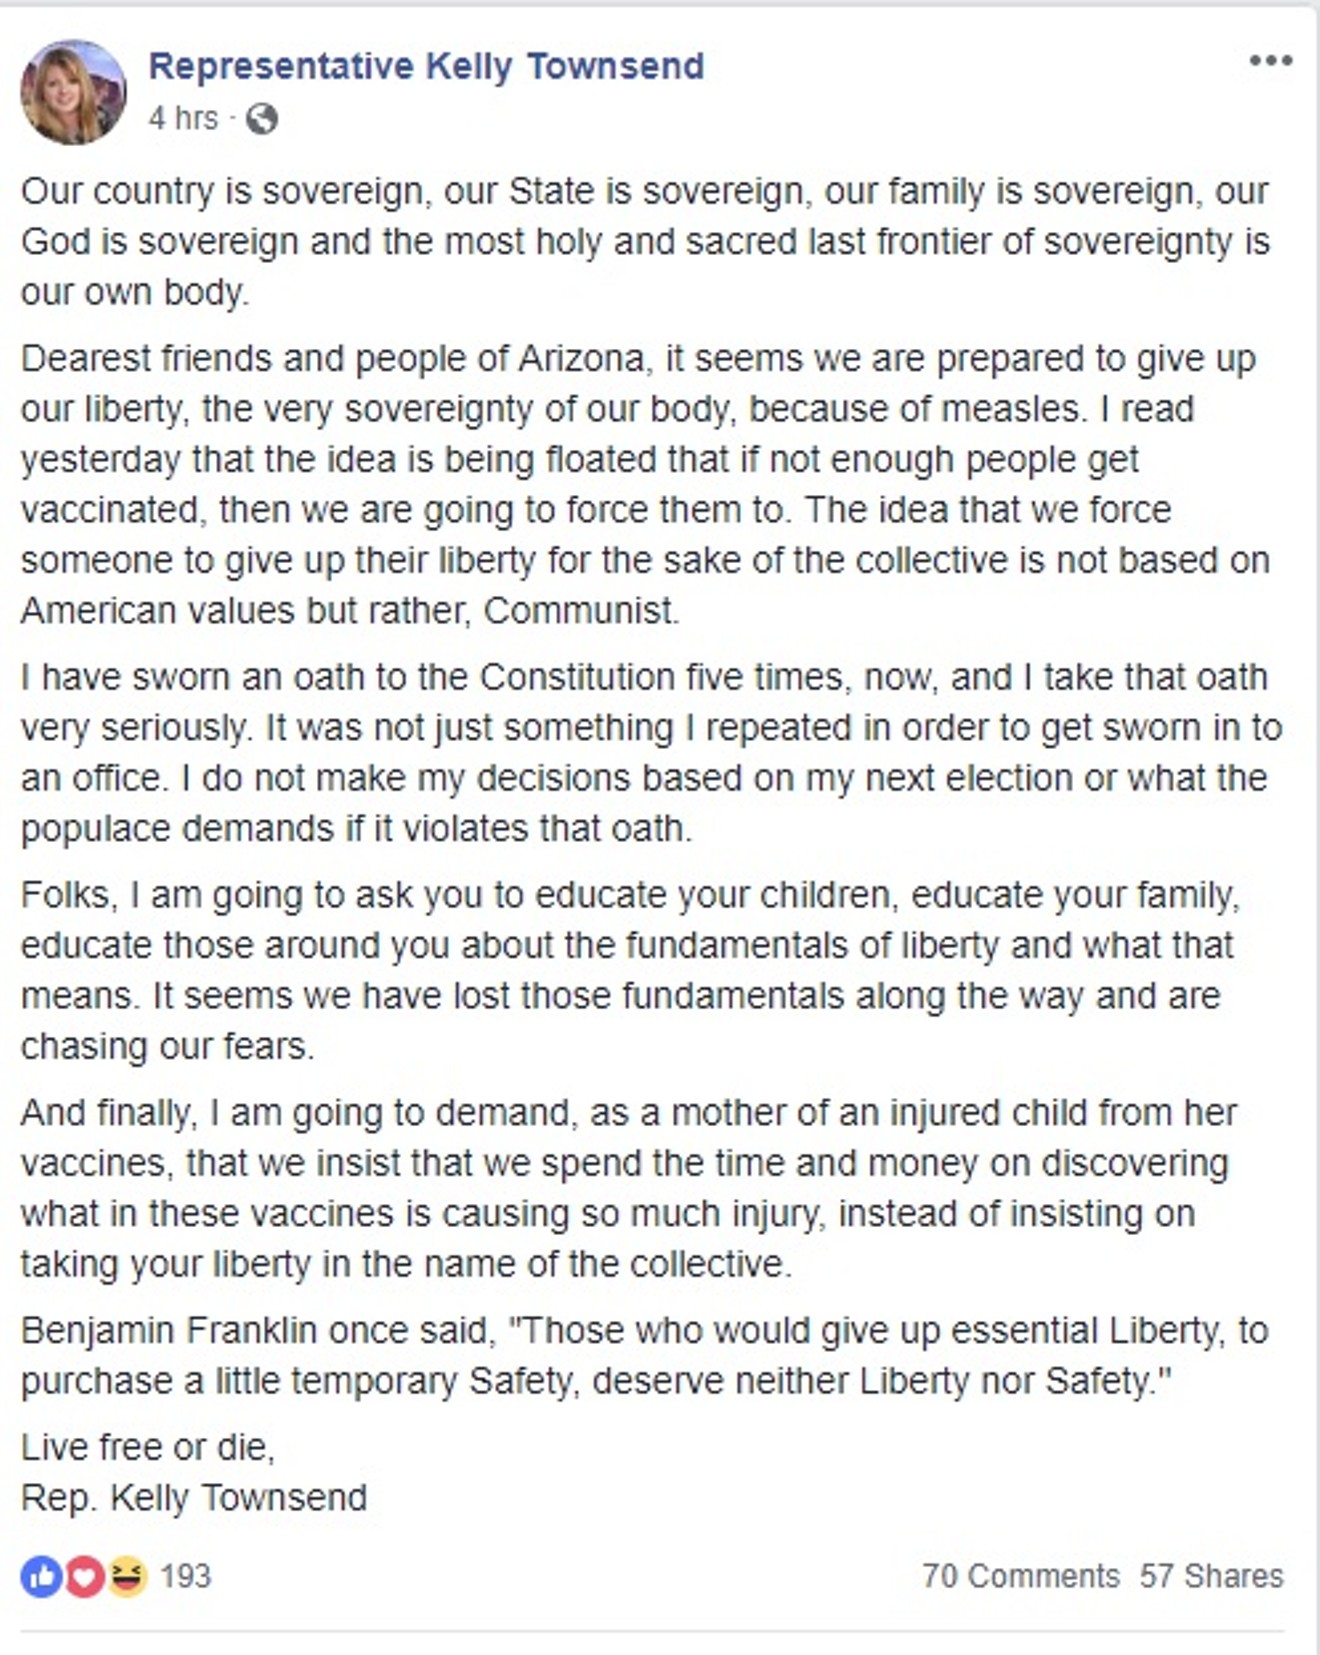 Kelly Townsend's full post equating vaccinations with Communism.